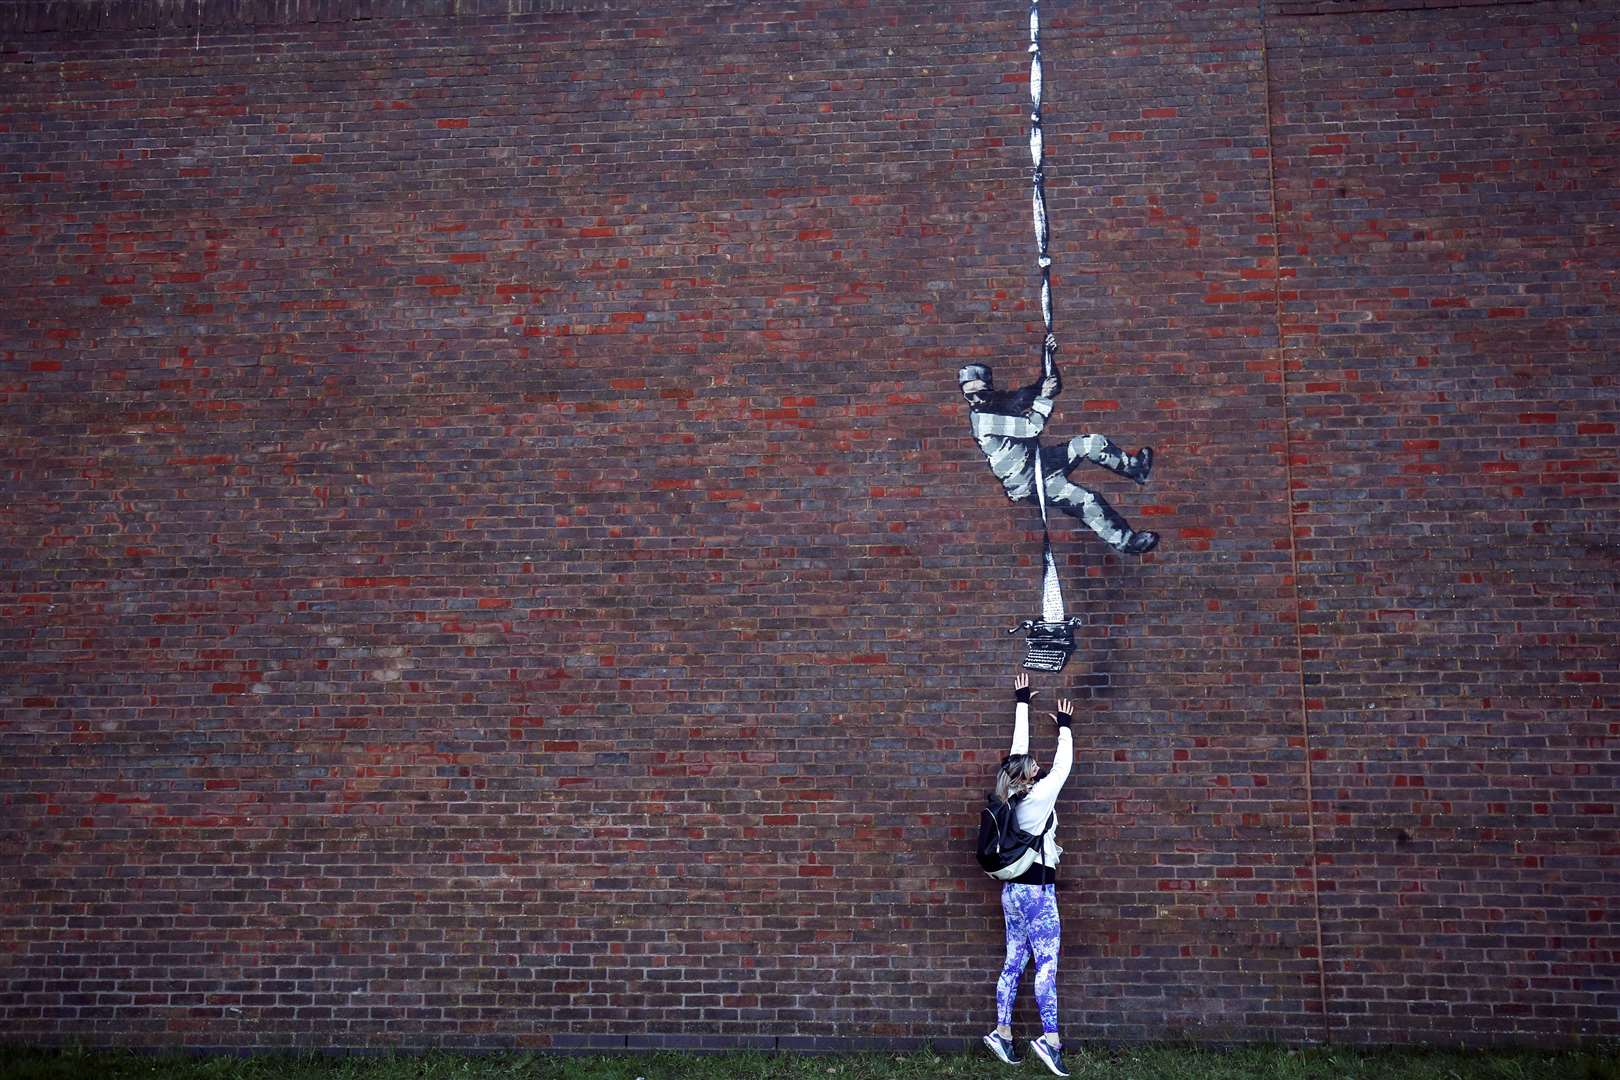 A member of the public looks at an artwork on the wall of the former prison in Reading (Steve Parsons/PA)